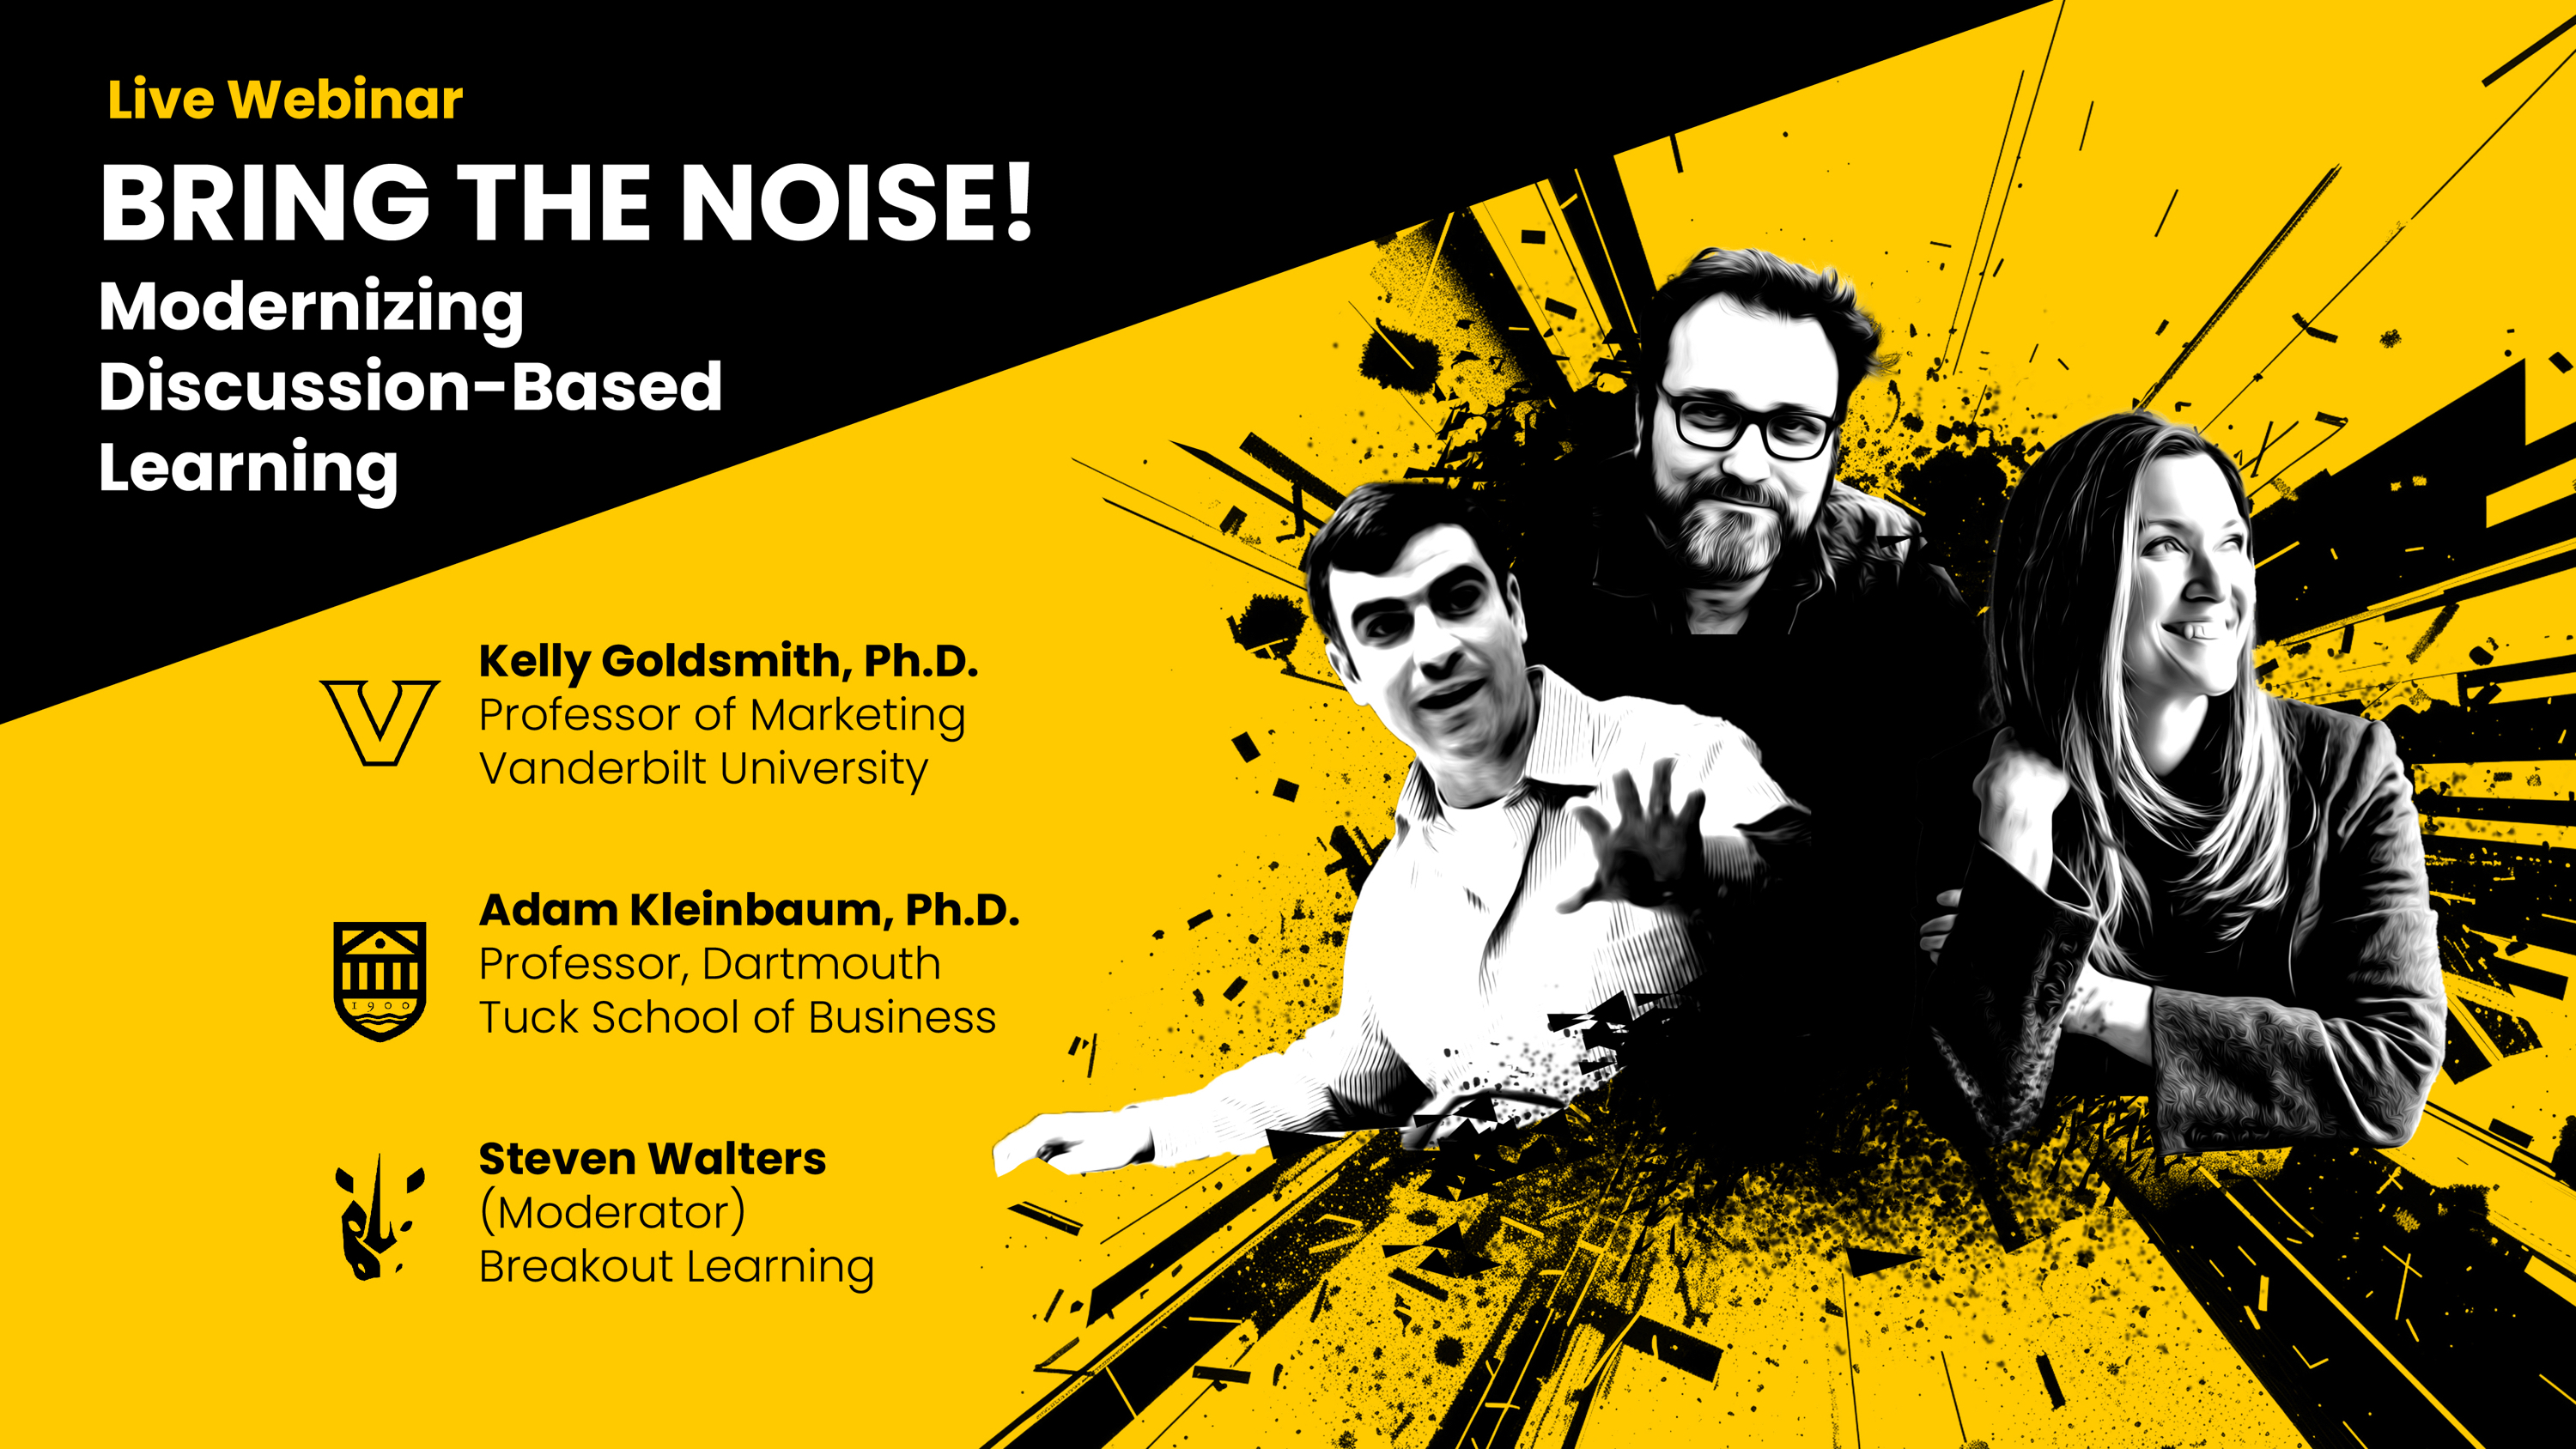 BRING THE NOISE! Modernizing Discussion-Based Learning